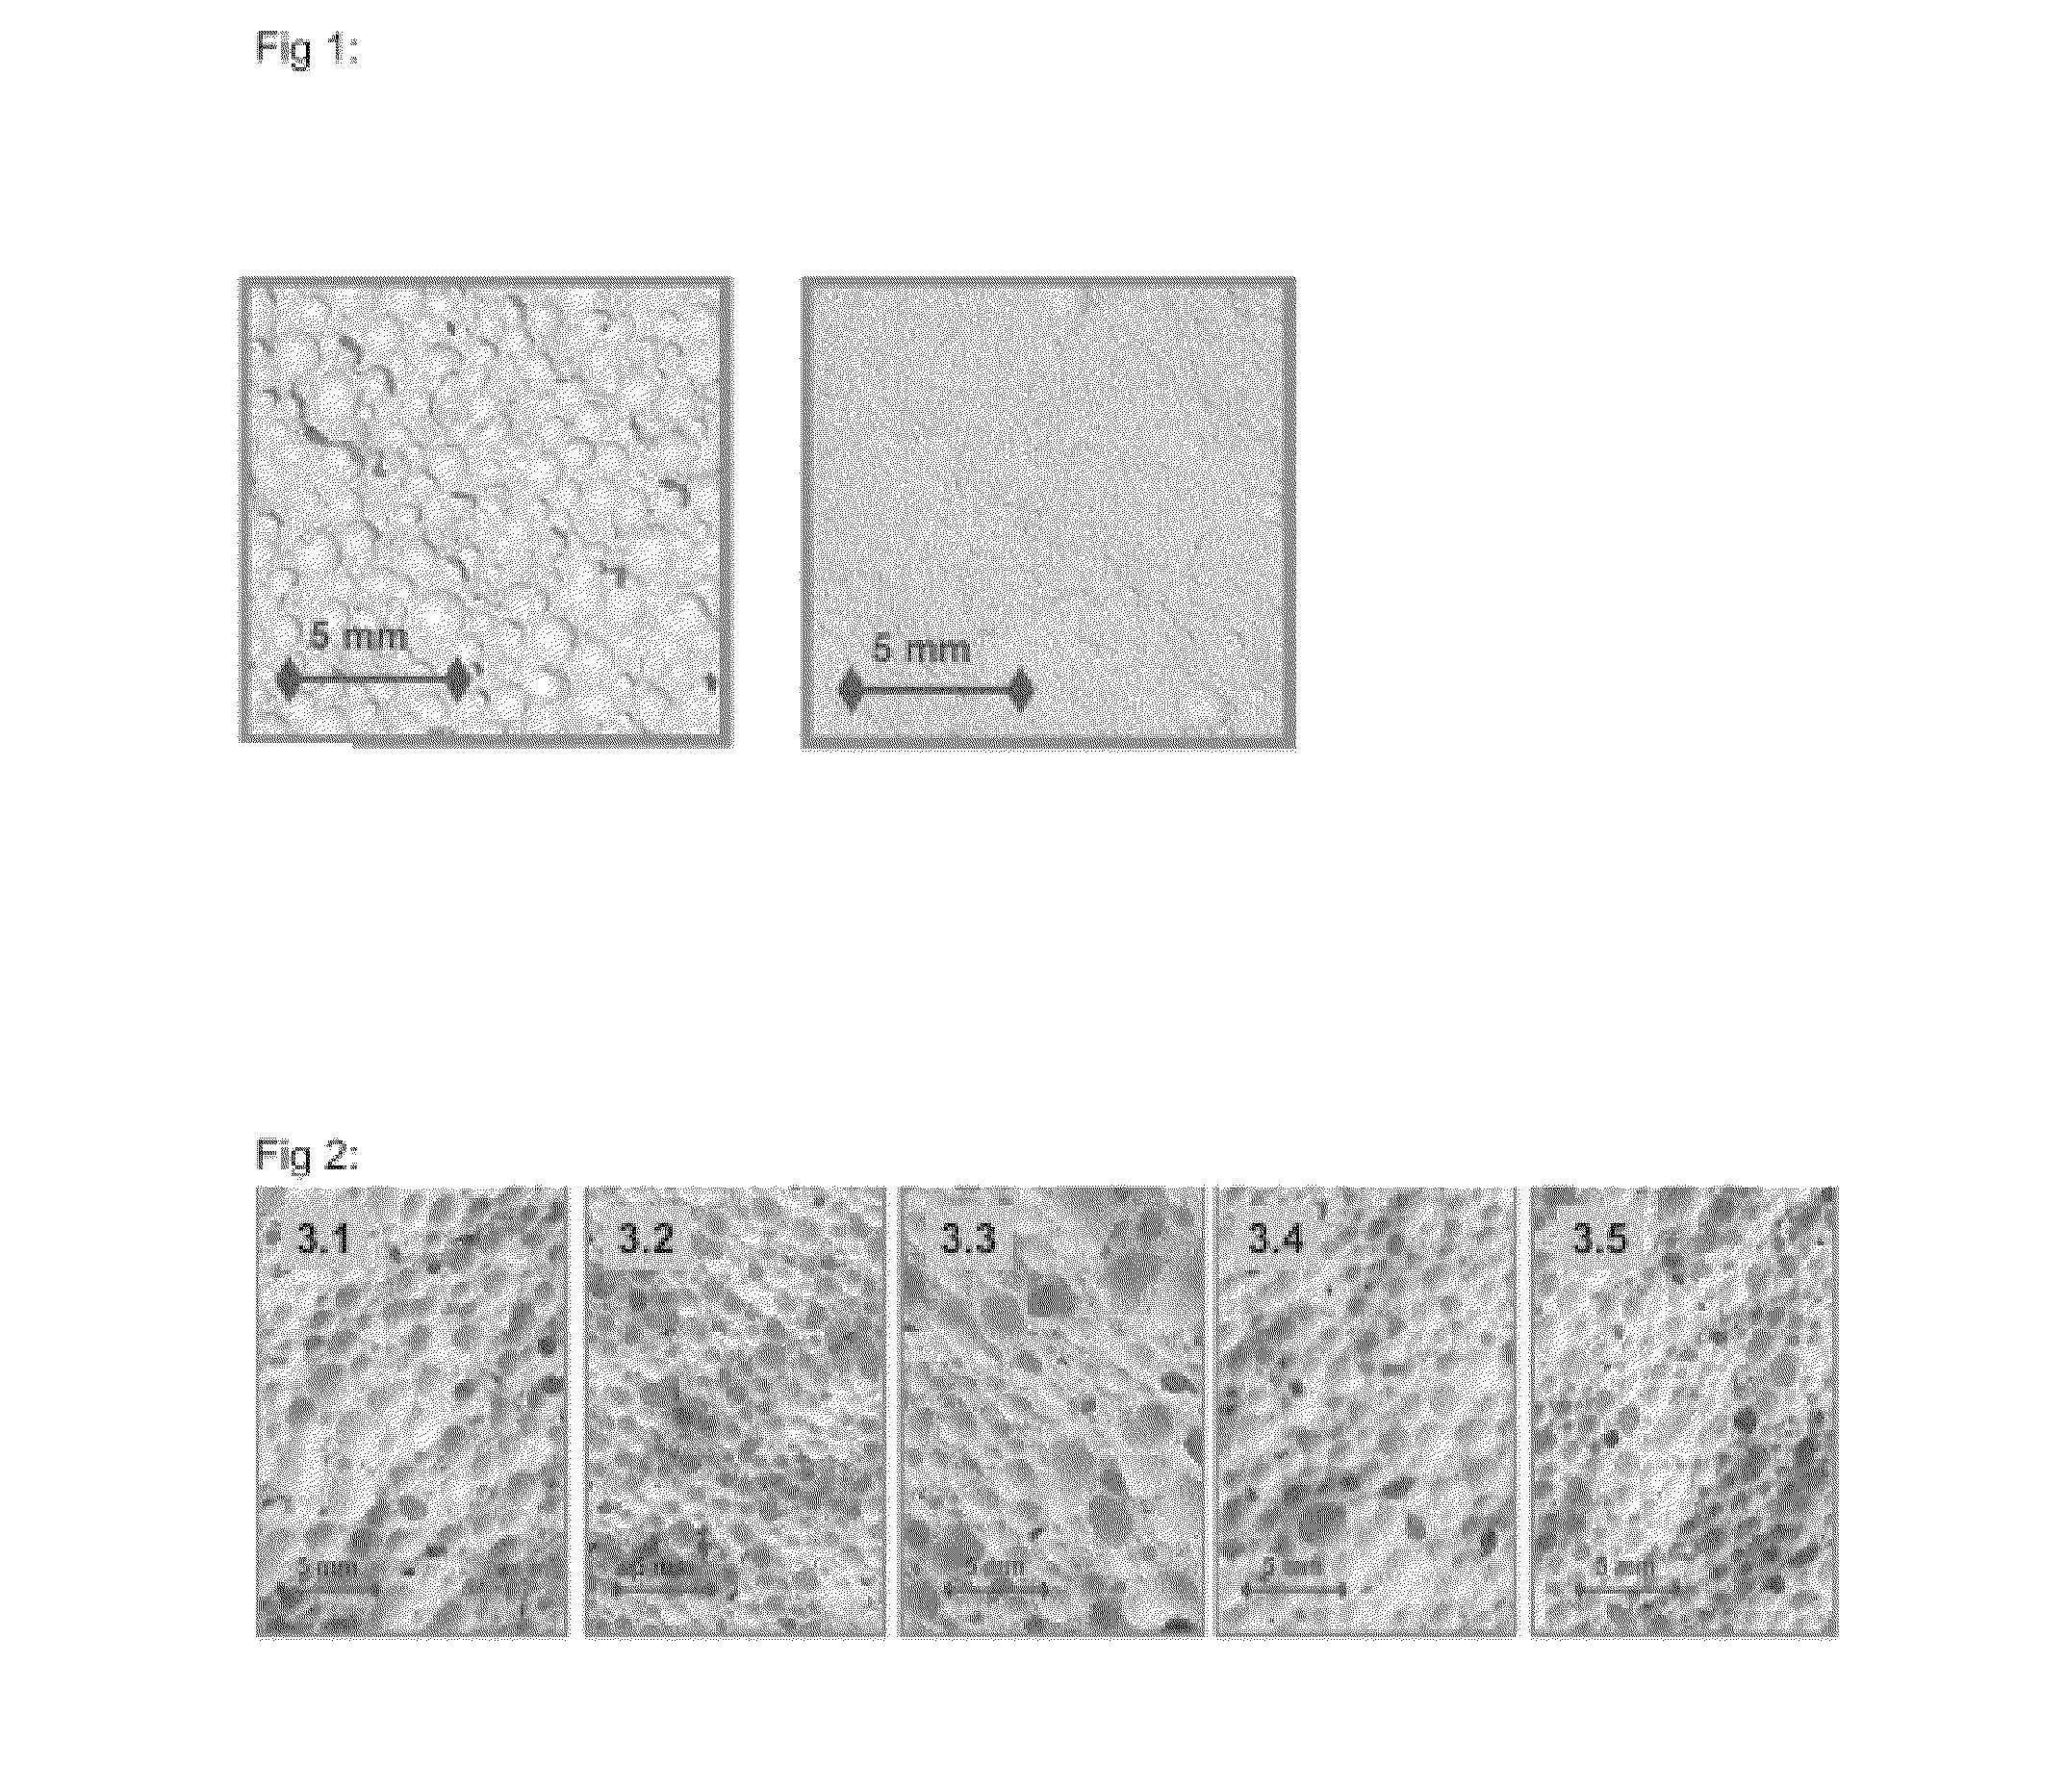 Light-weight gypsum board with improved strength and method for making same